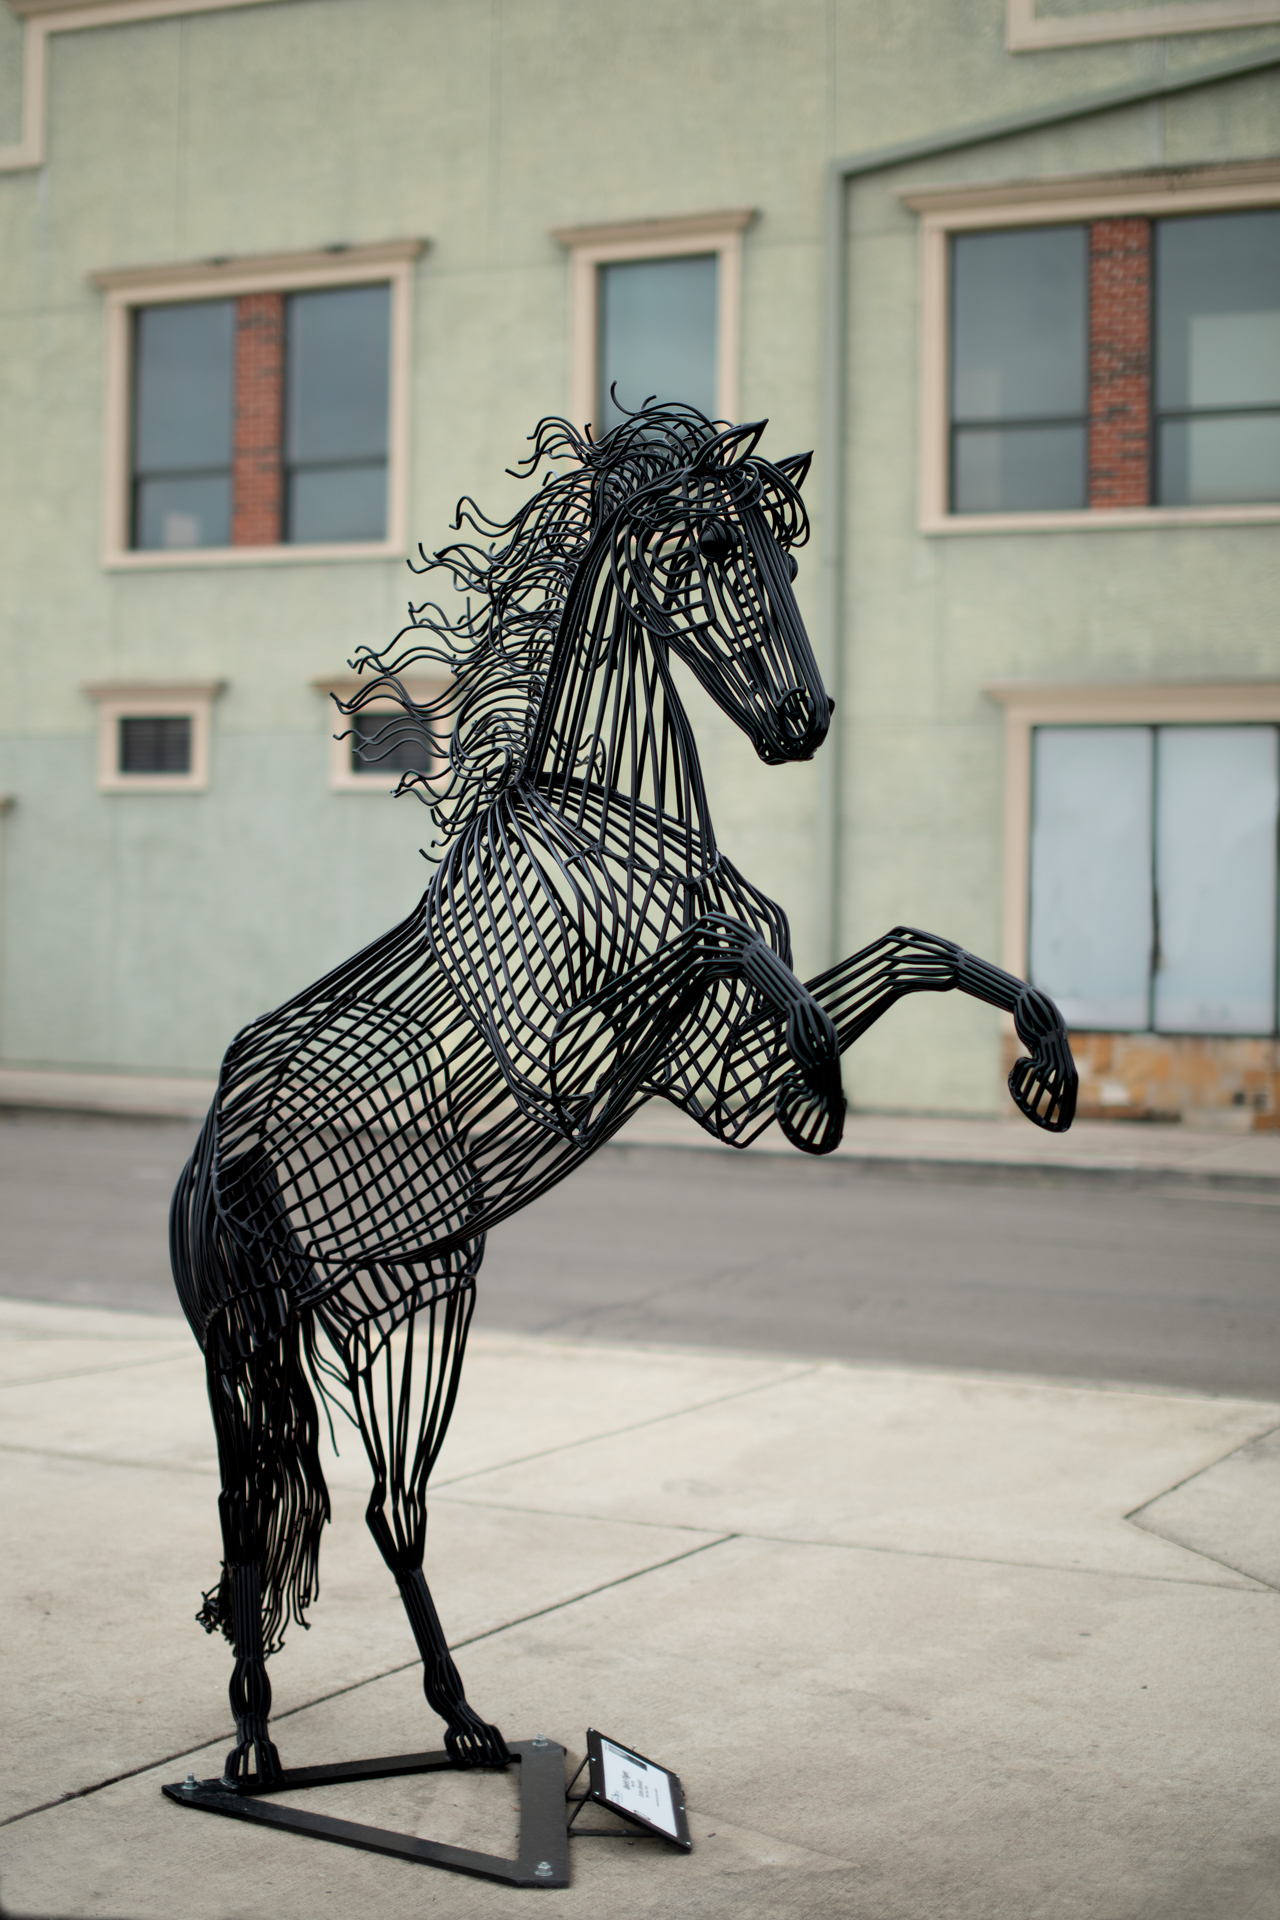 A metal sculpture of a black horse in front of a cream-colored building